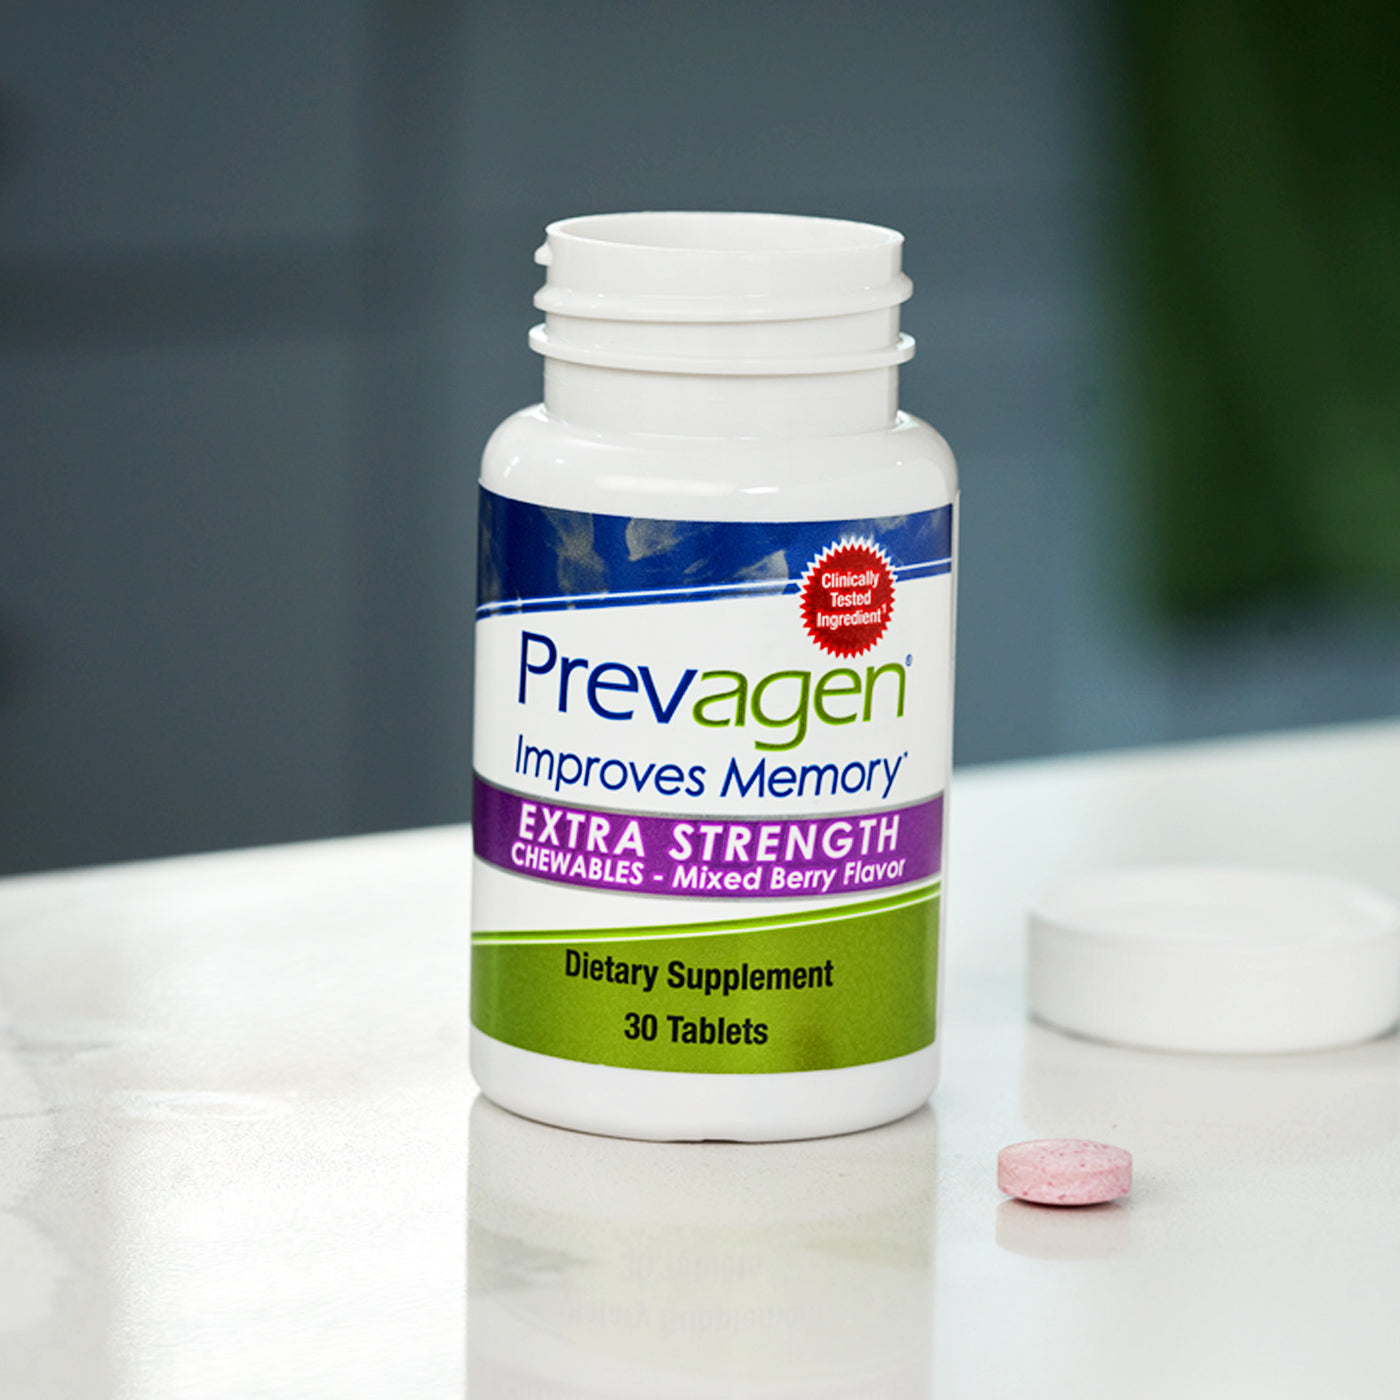 Prevagen mixed berry flavor chewables extra strength bottle on counter